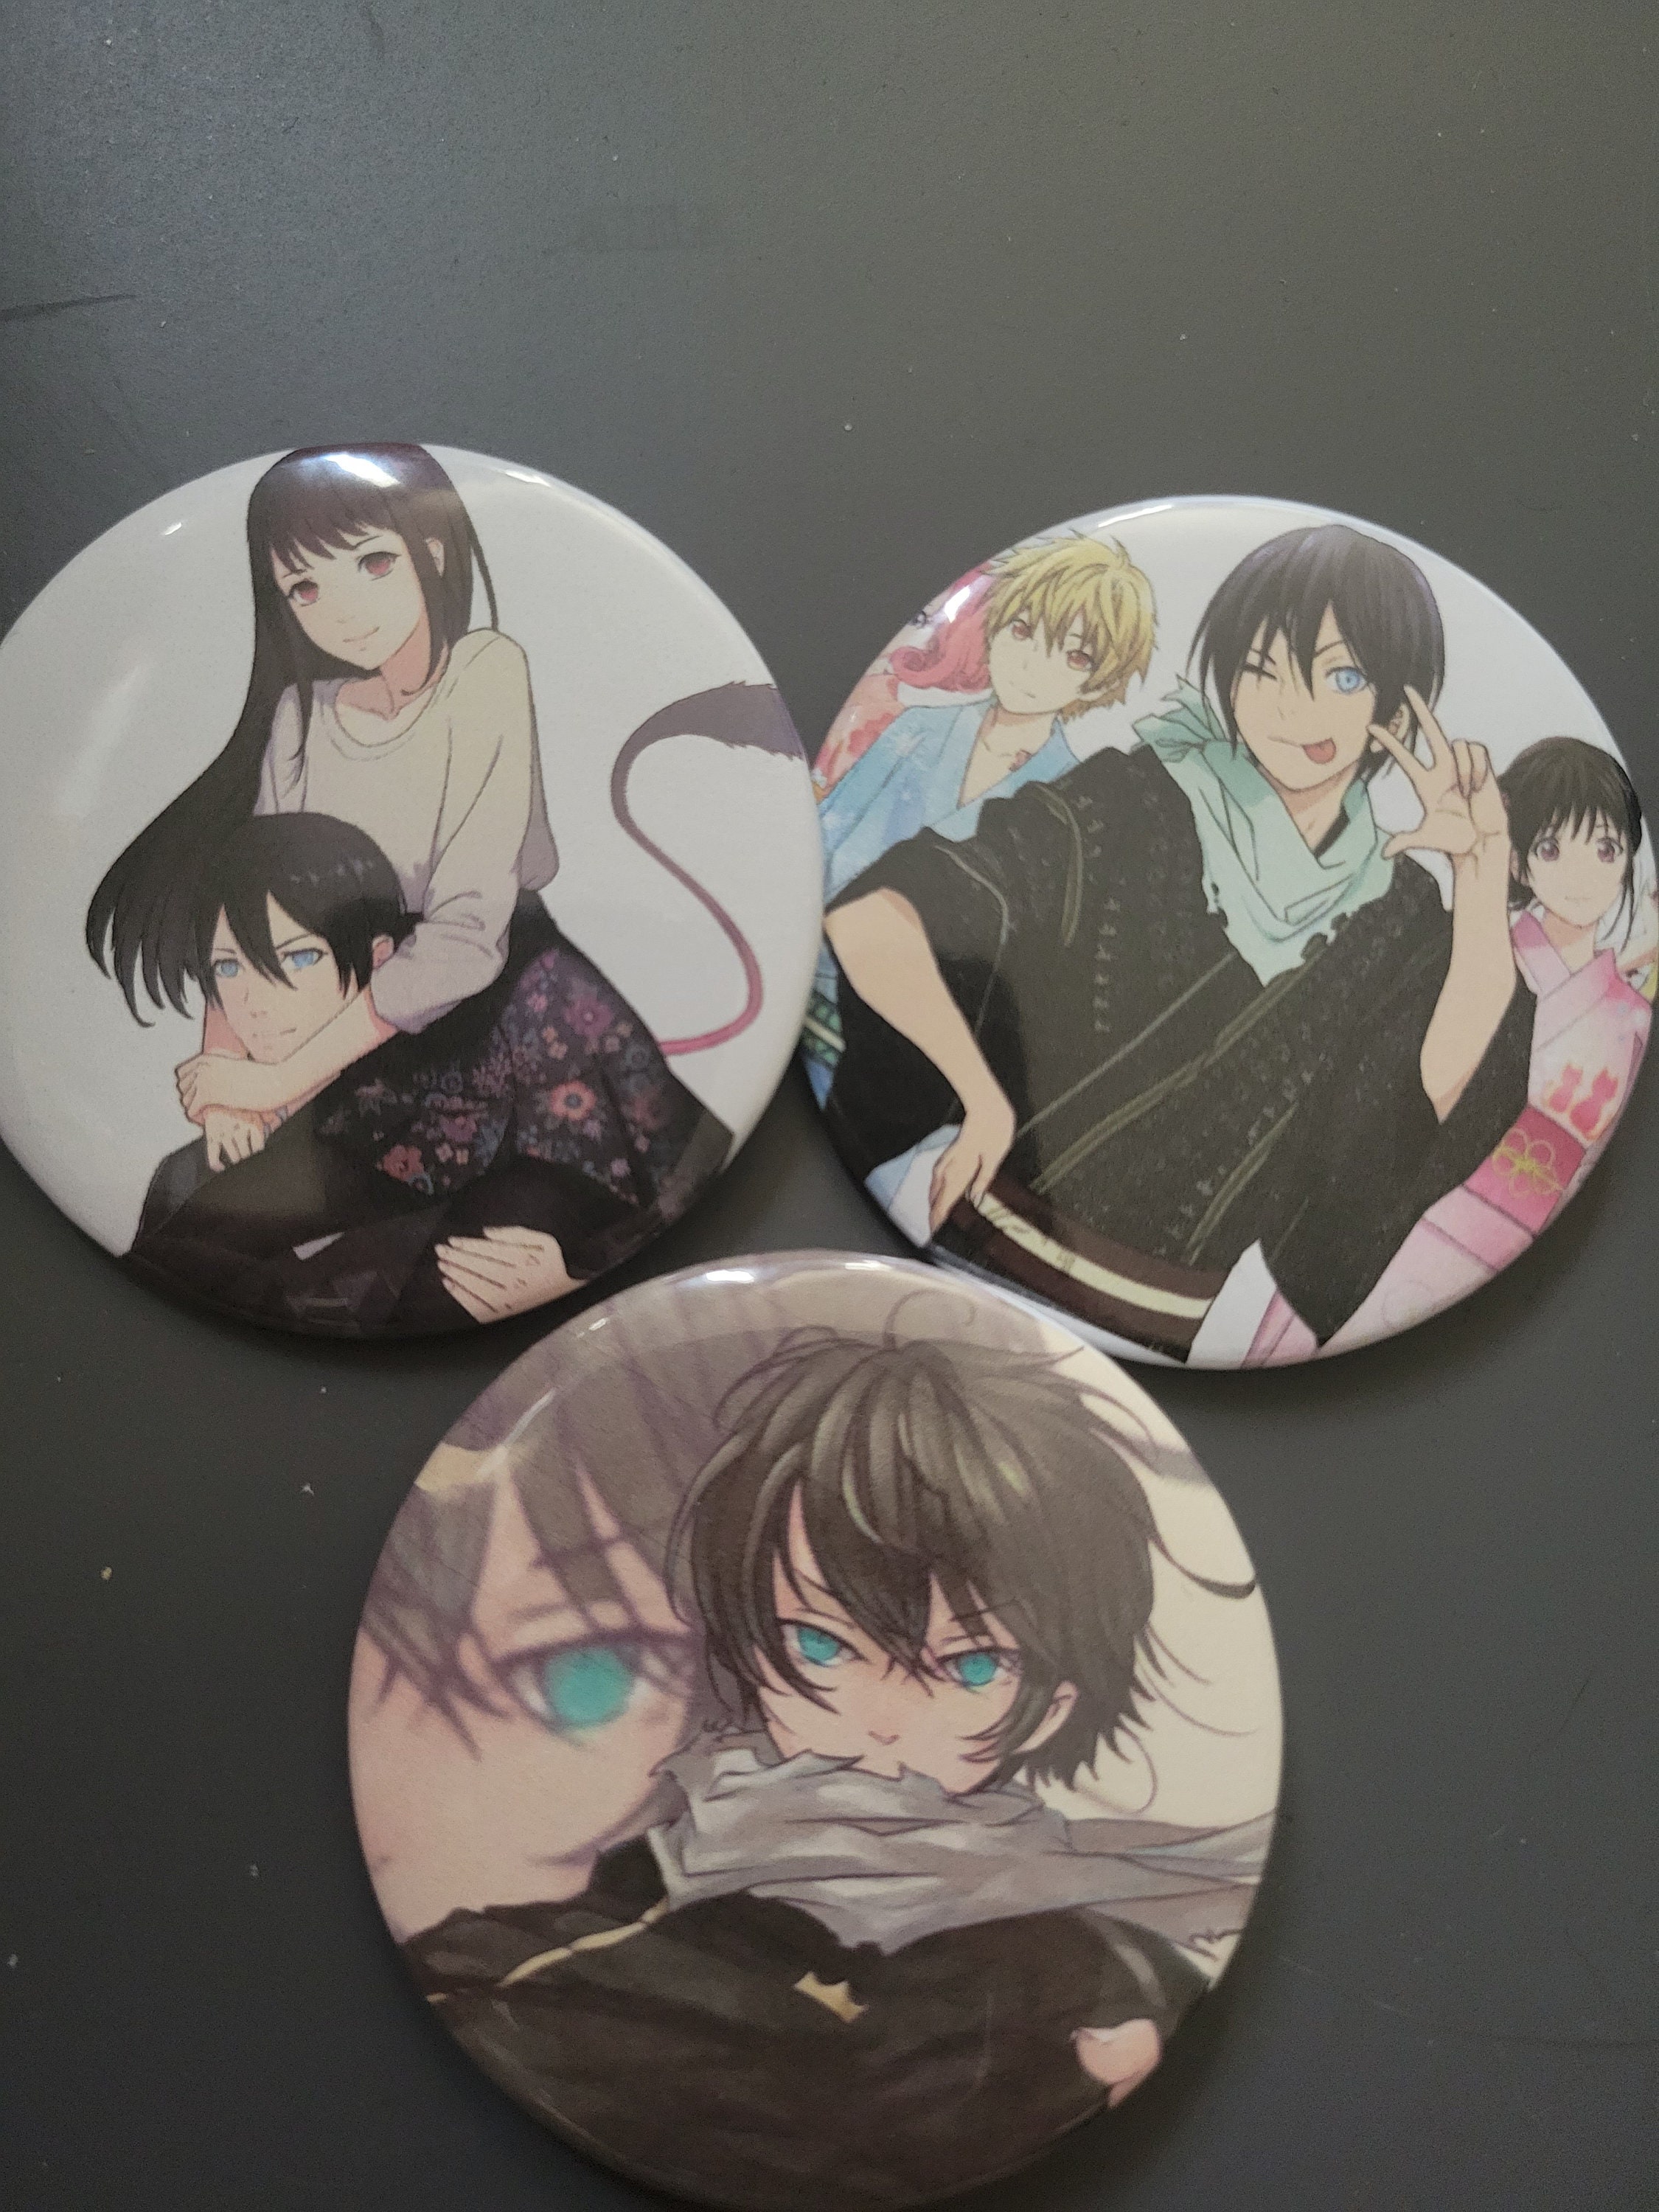 Japanese Urban Fantasy Noragami Aragoto Anime Characters Arts Pin for Sale  by JaneRobert39